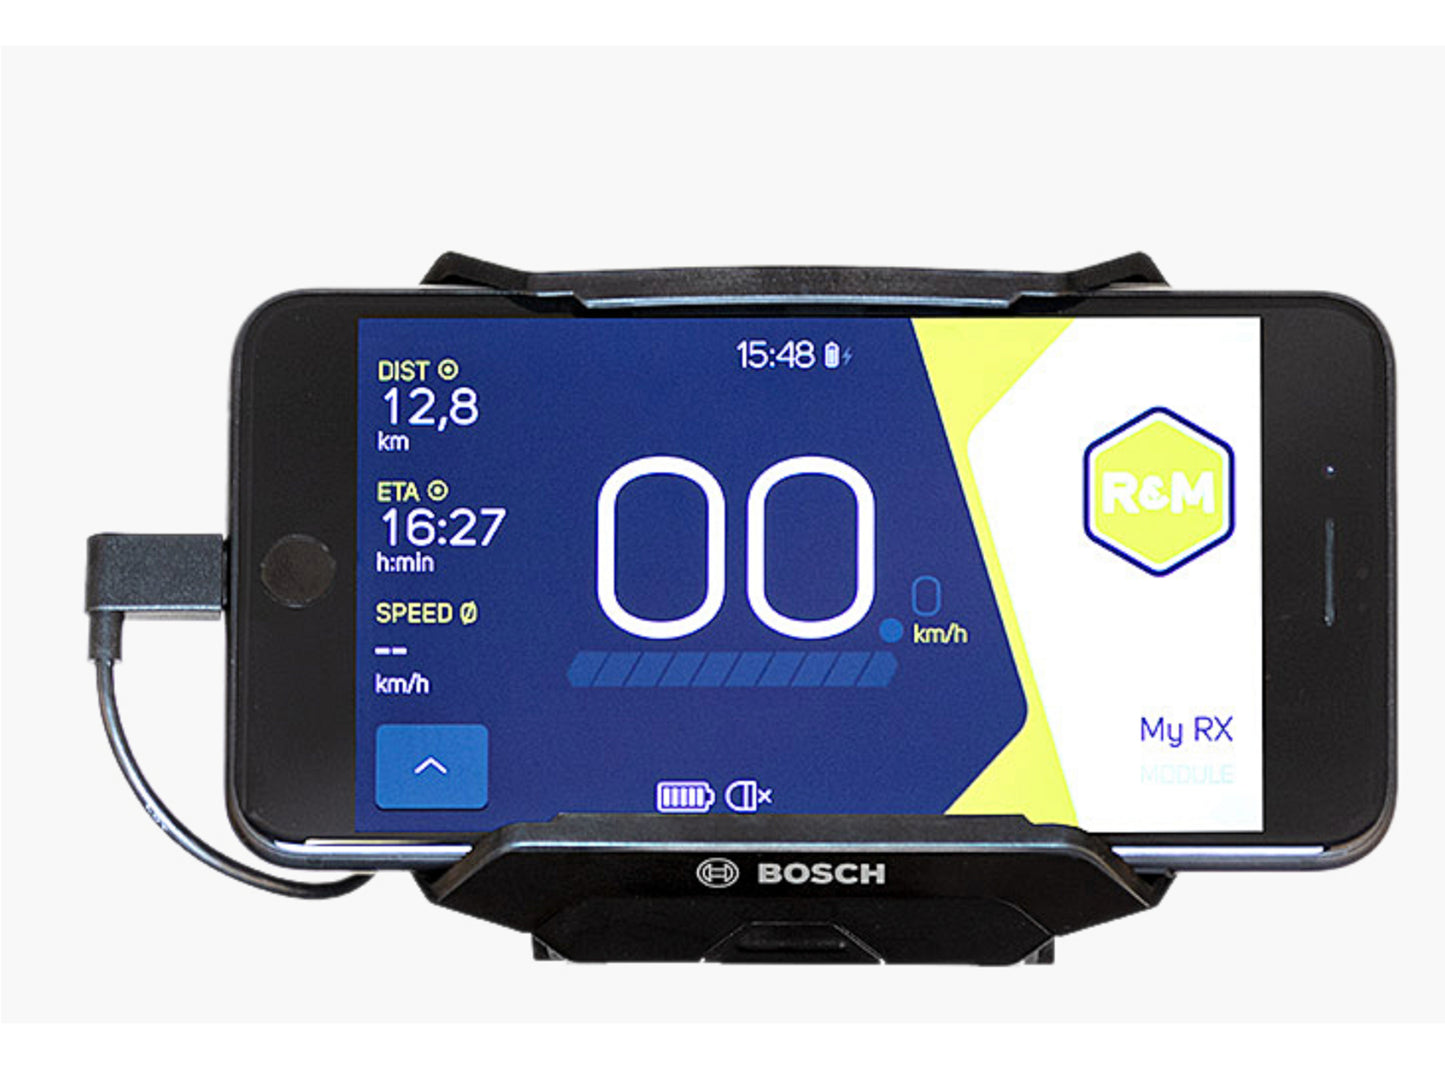 Riese & Muller Packster 70 Touring cargo eMTB hardtail close up bosch smartphone display option